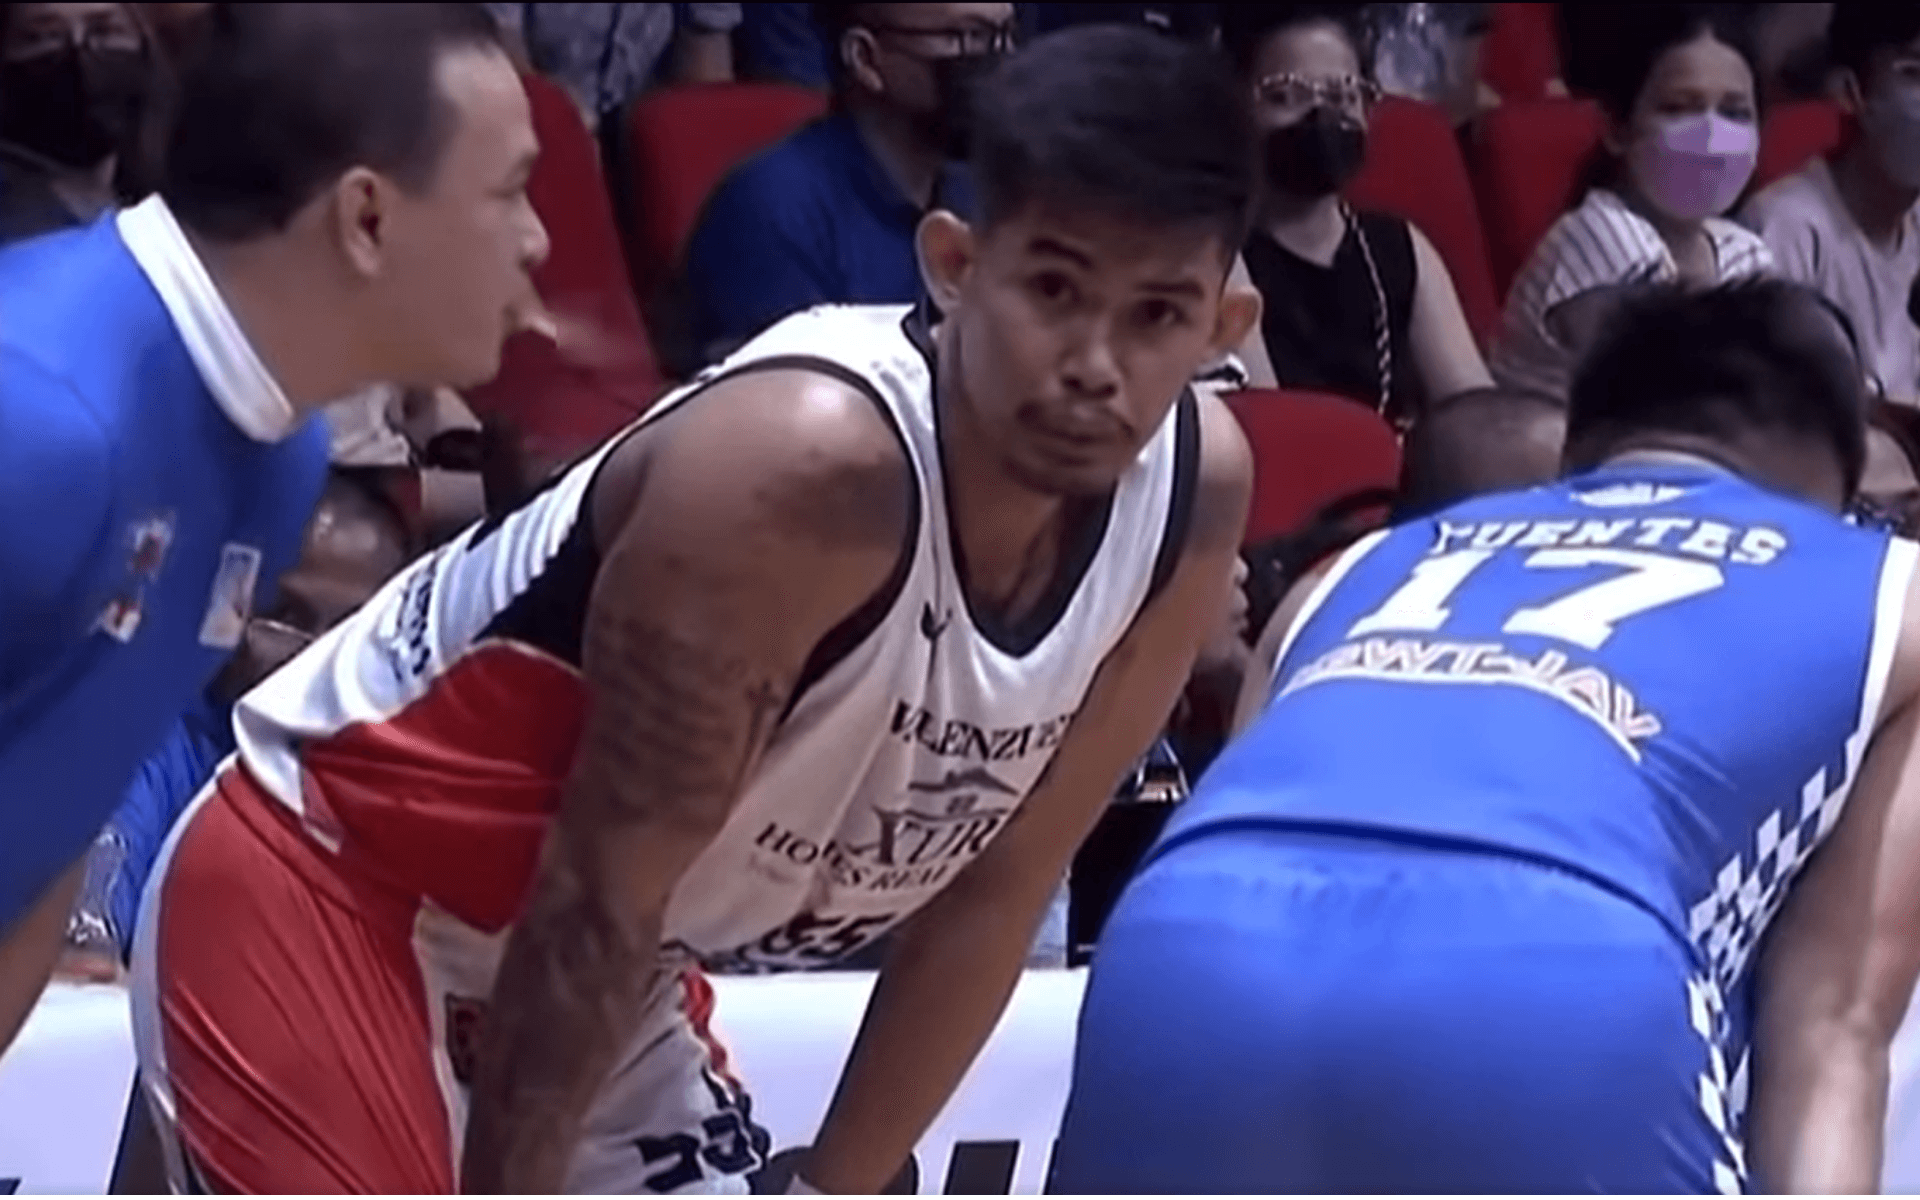 MPBL coach Yong Garcia apologizes to Lordy Casajeros over spitting incident